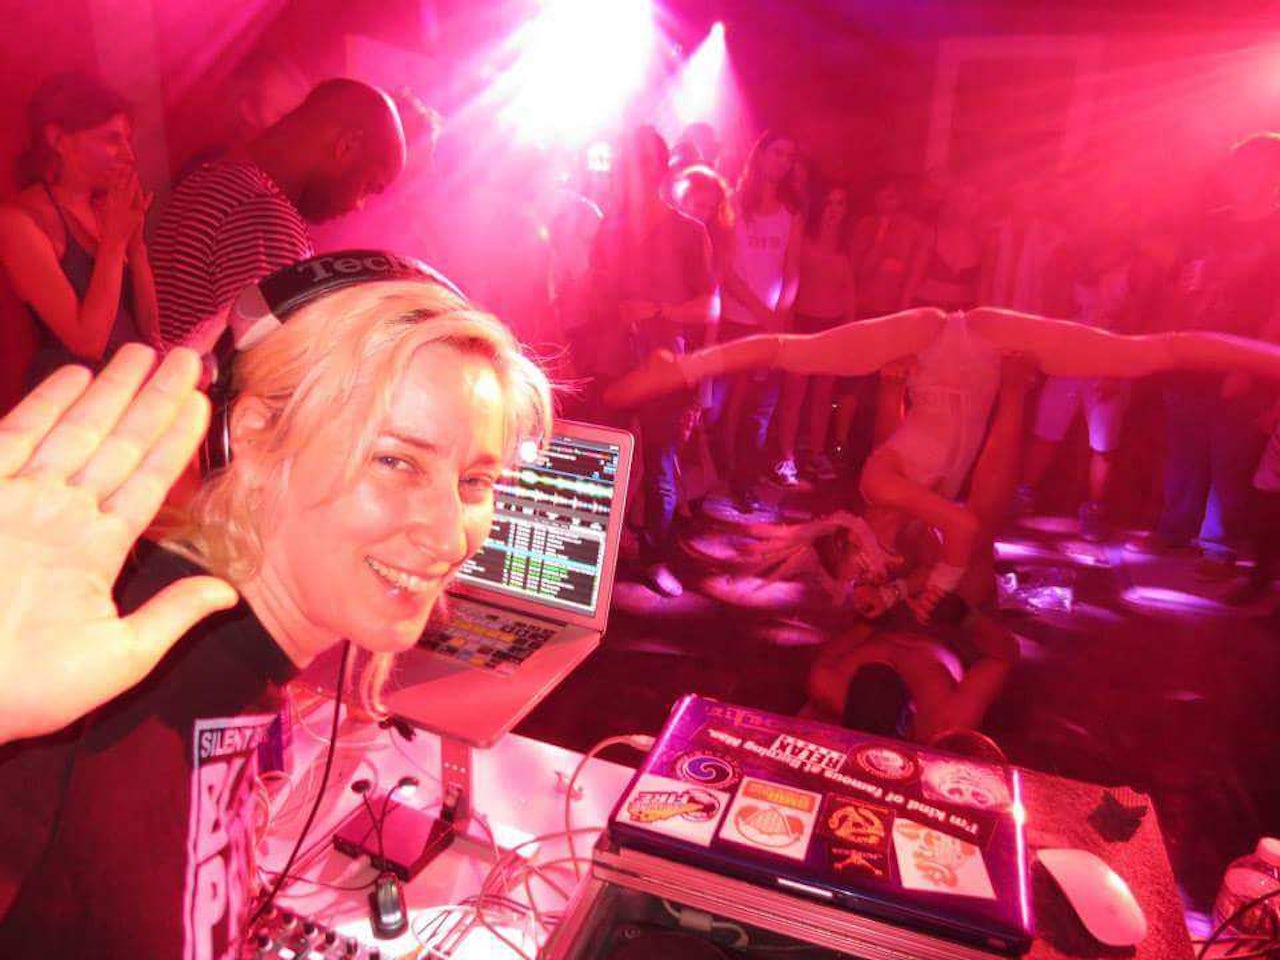 What it's like to DJ a sex party | The Outline